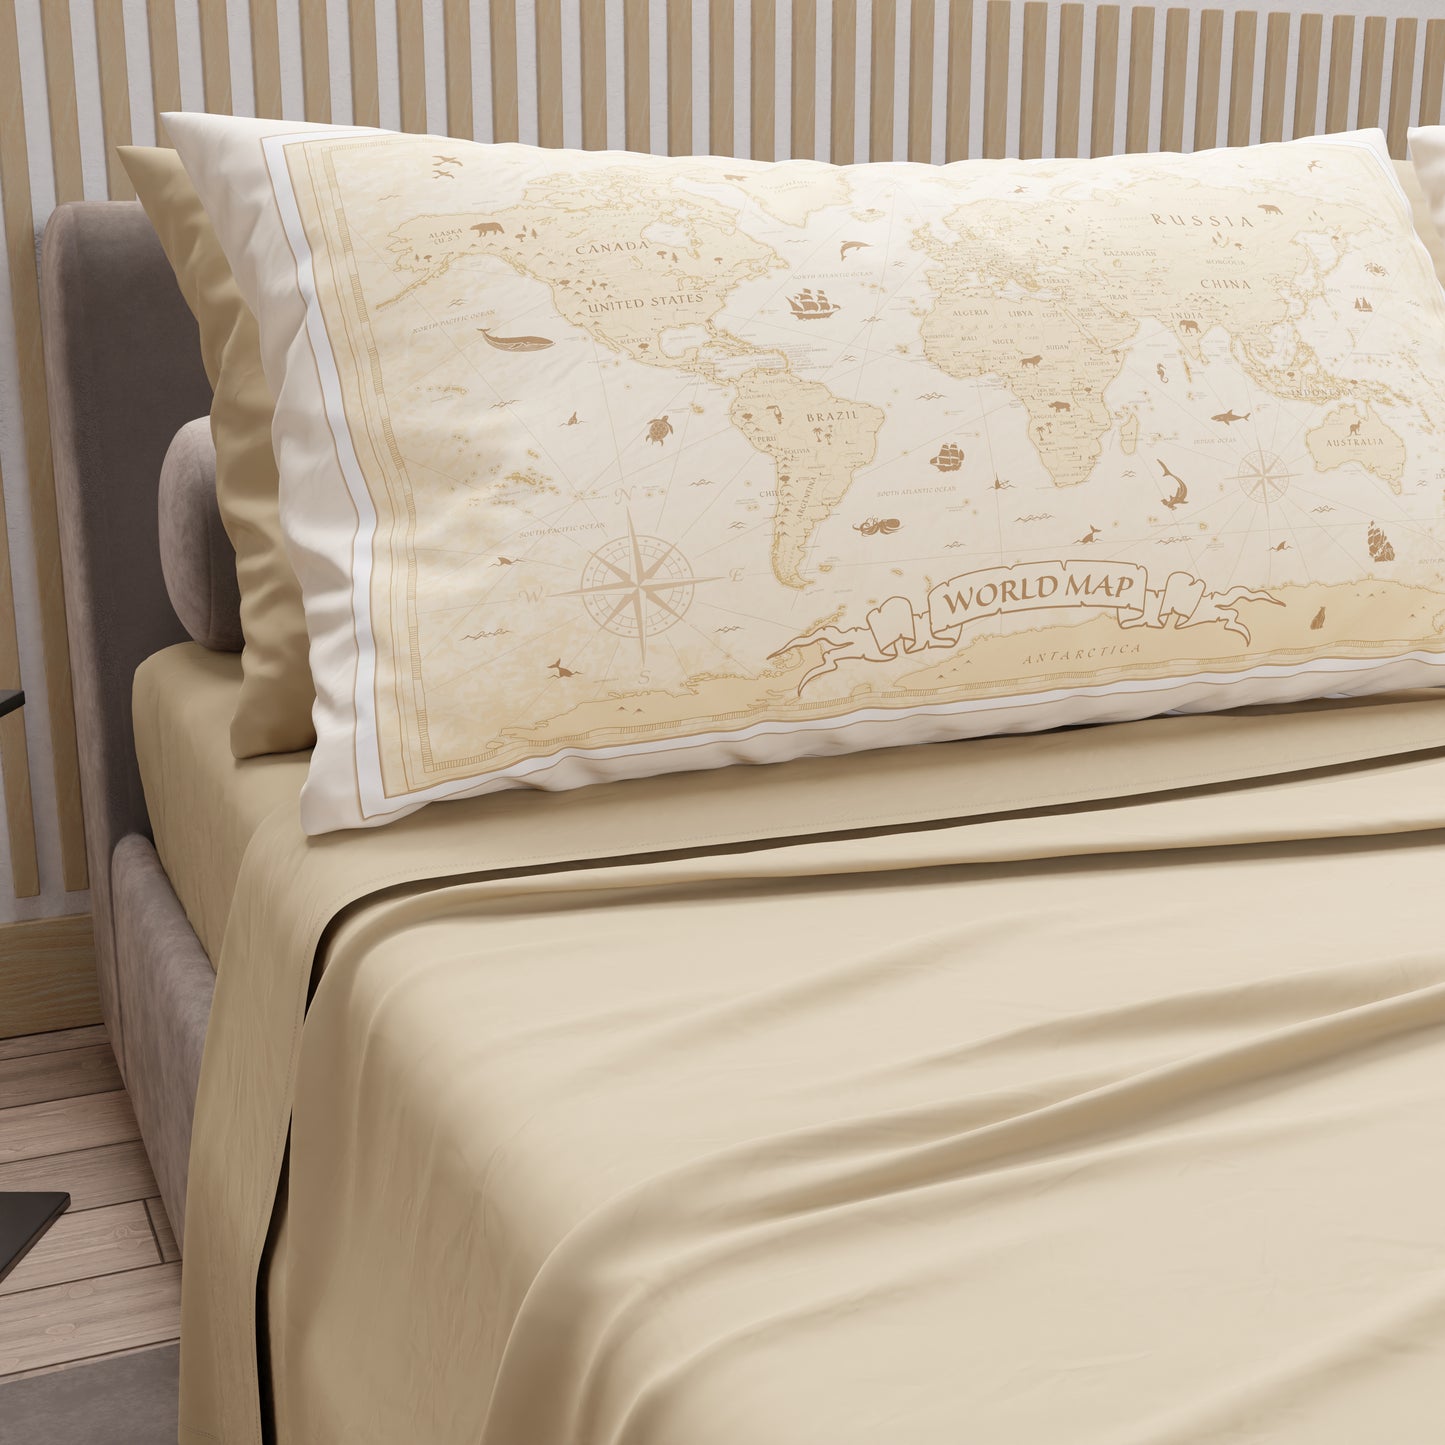 Cotton Sheets, Bed Set with World Beige Digital Print Pillowcases